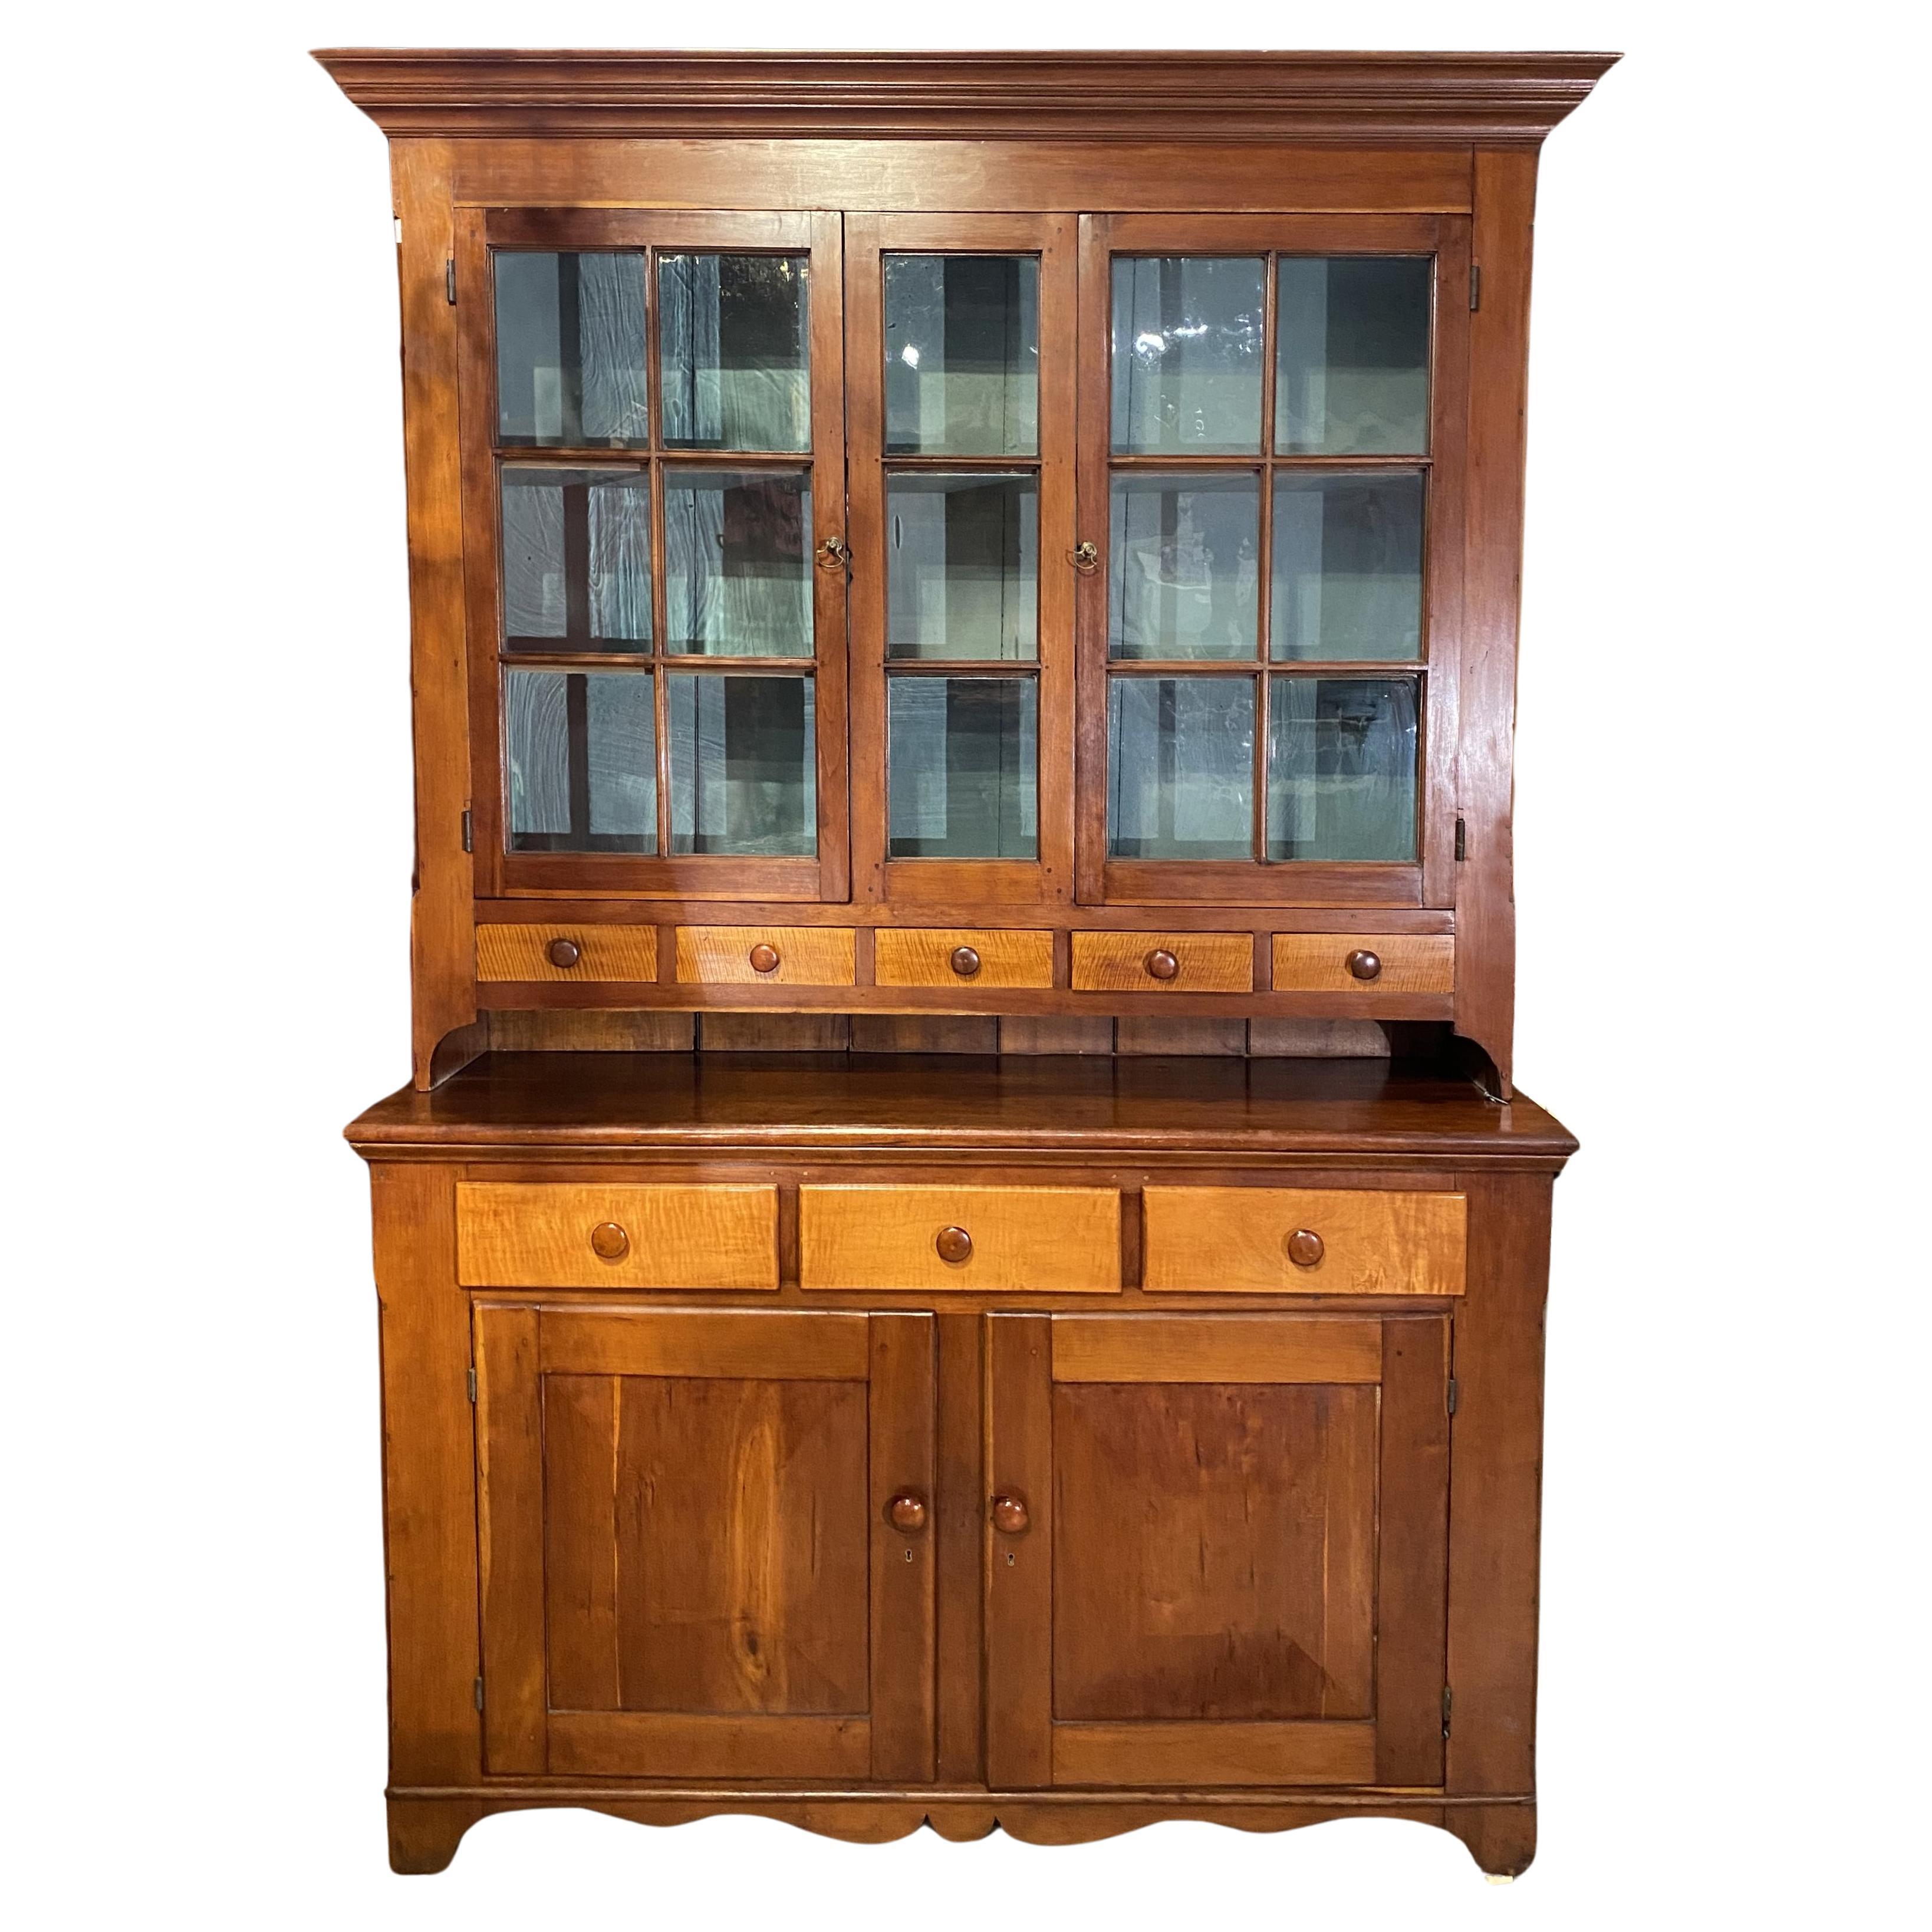 19th c American Cherry Two Part Step Back Cupboard w/Tiger Maple Drawer Fronts For Sale